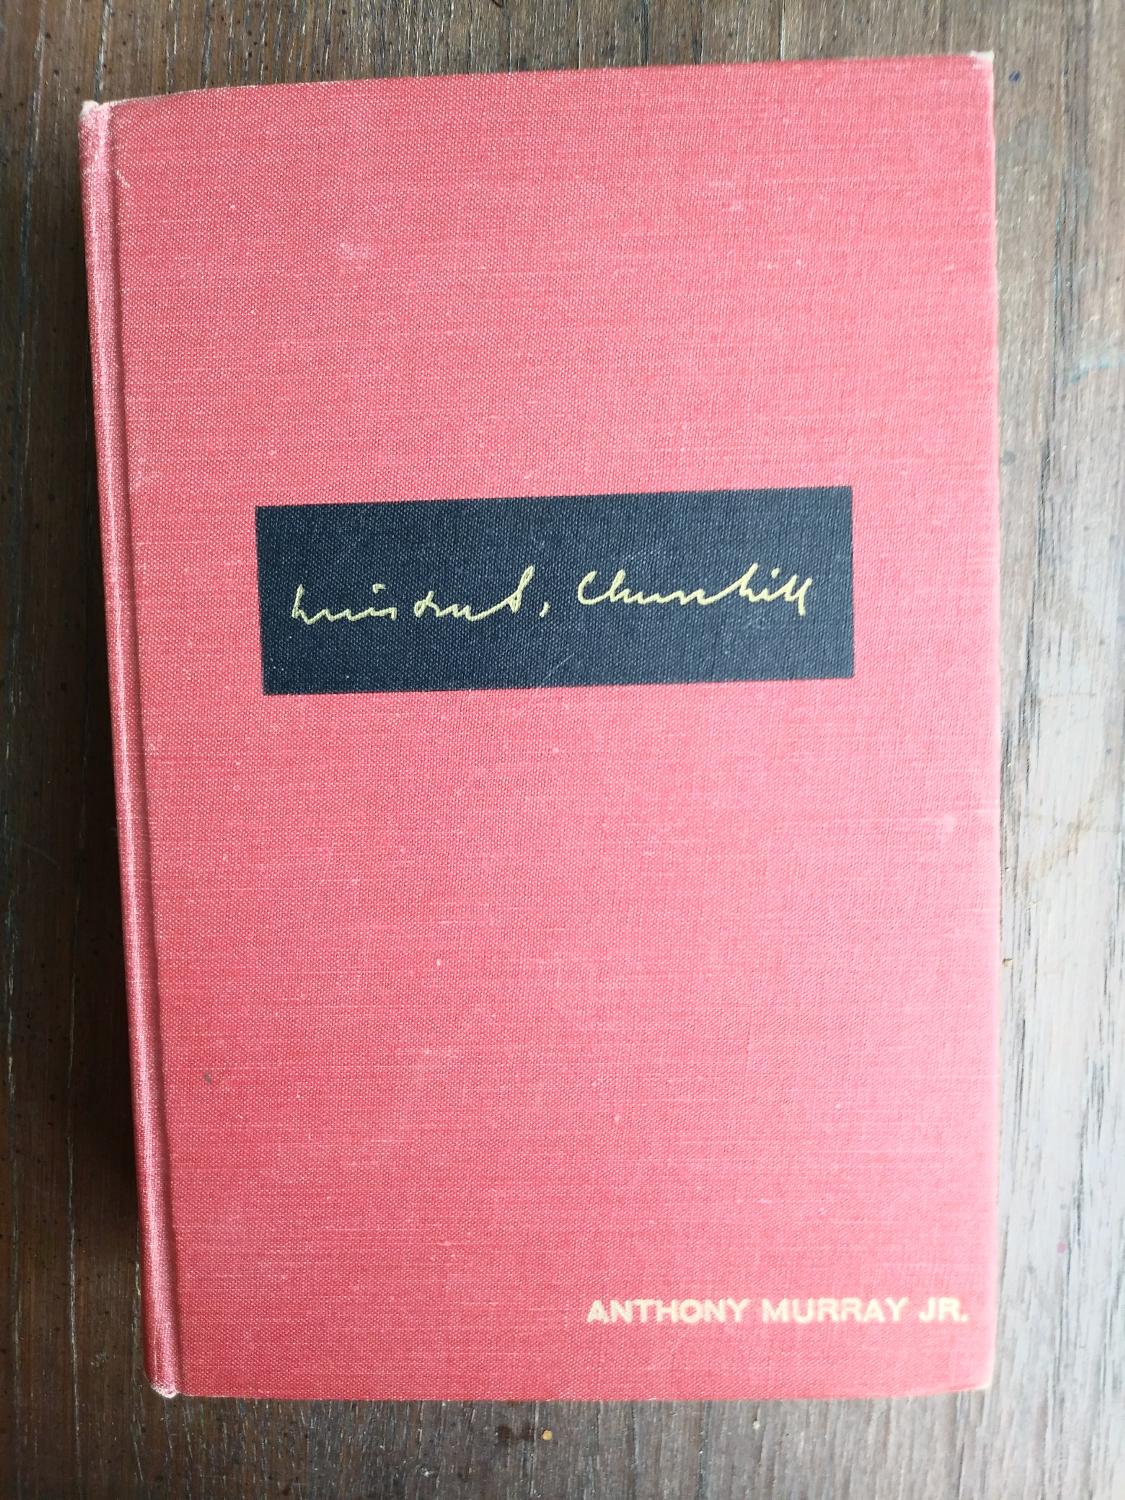 THE SECOND WORLD WAR by Winston Churchill 6 Volume first edition set 1948-1953 the front cover